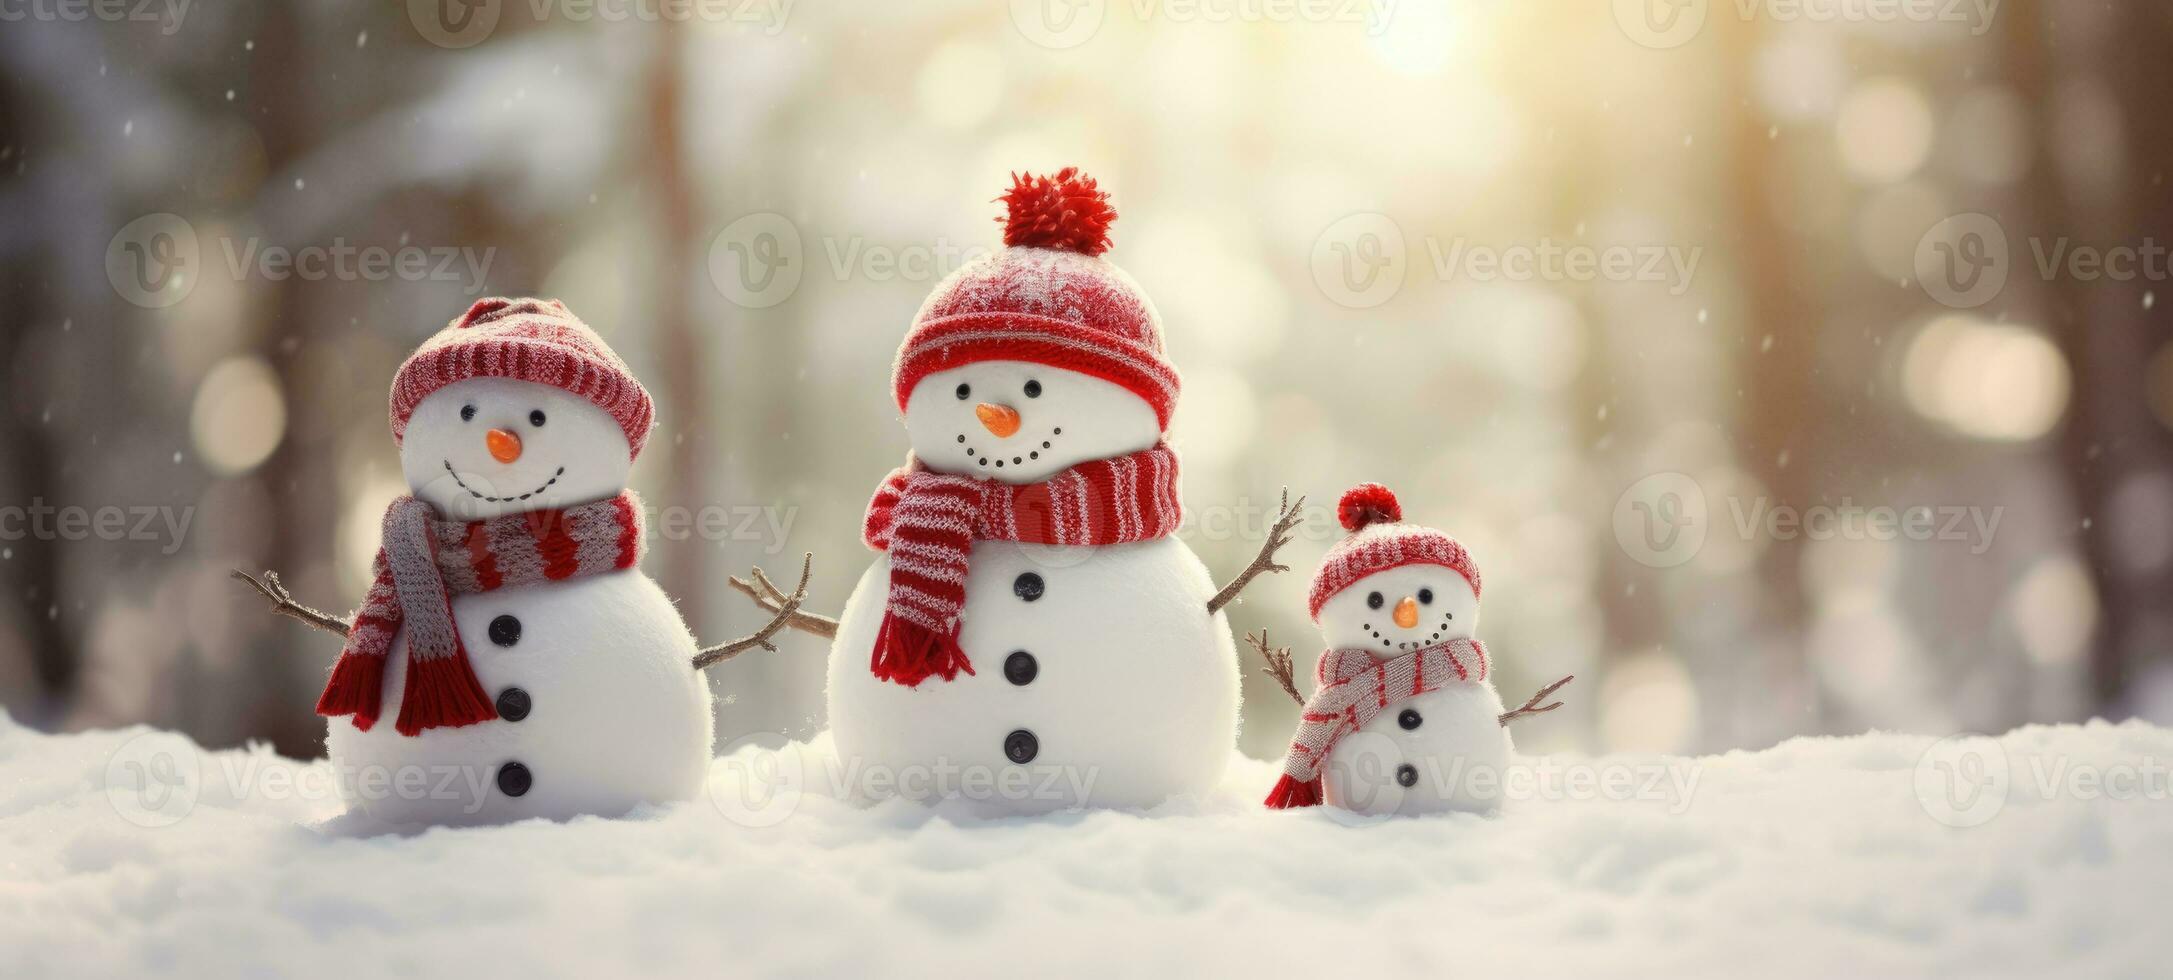 family snowman with scarf in snow forest greeting card xmas christmas photo